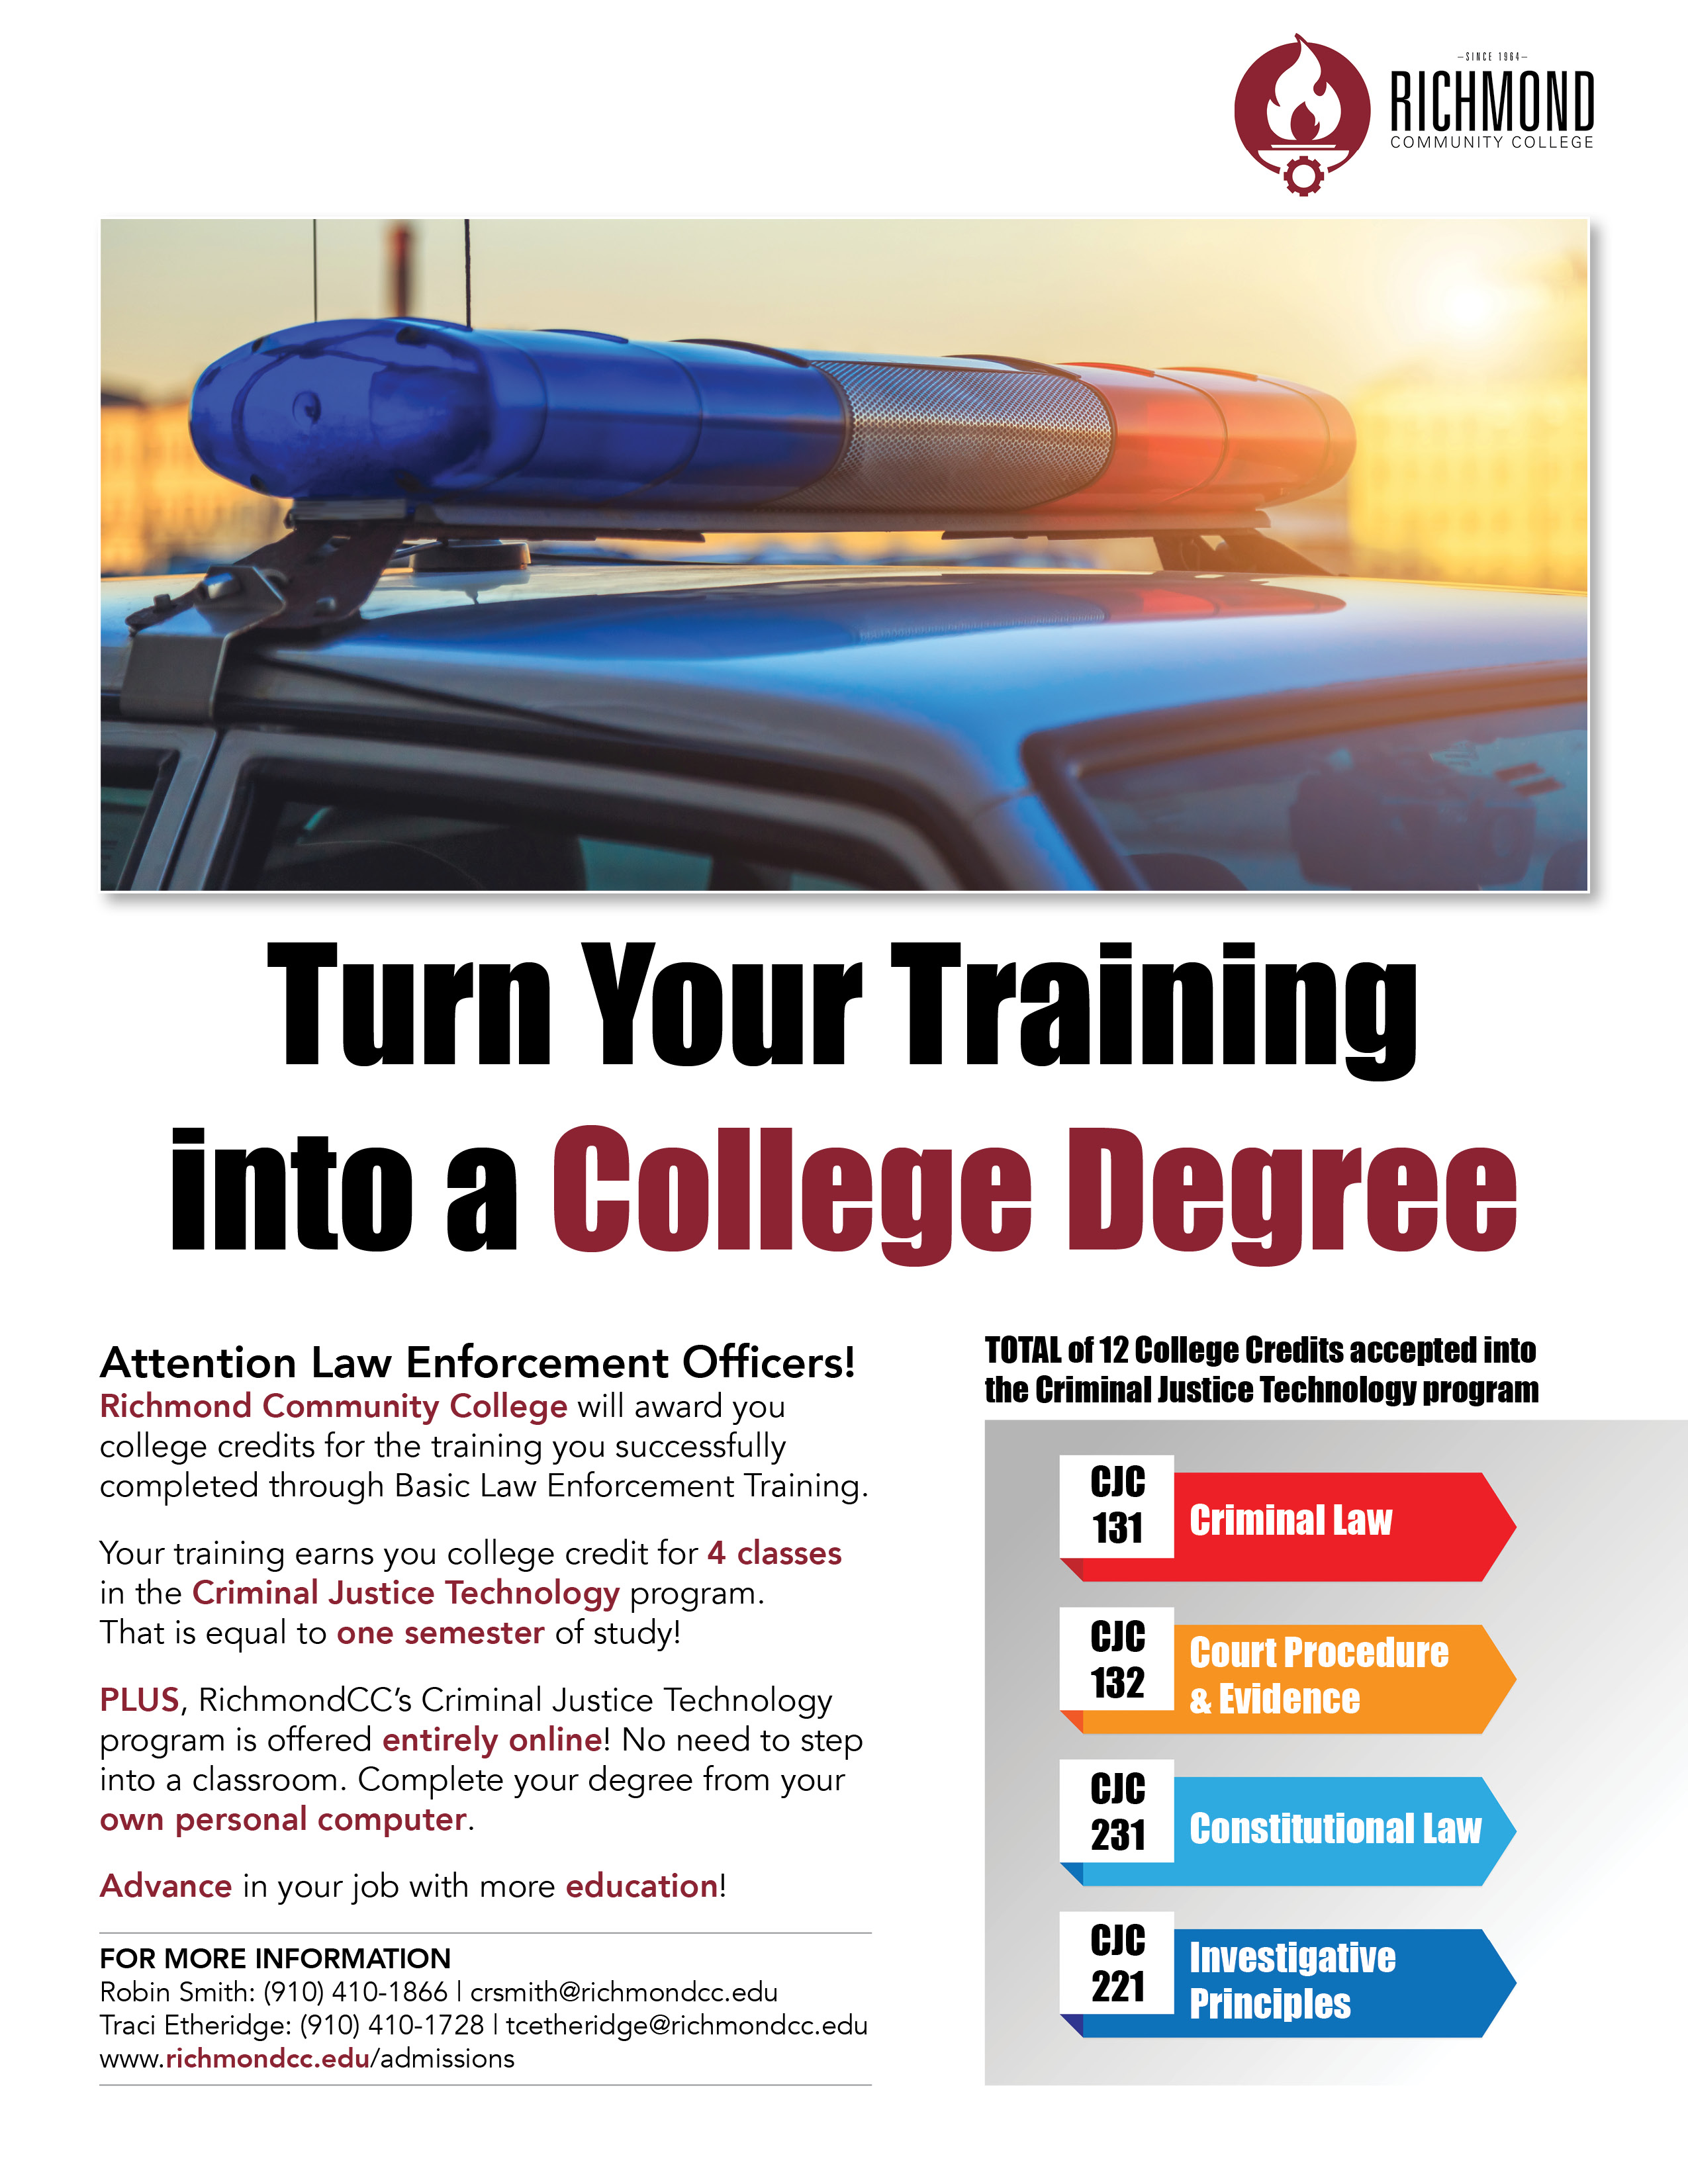 Turn your training into a college degree